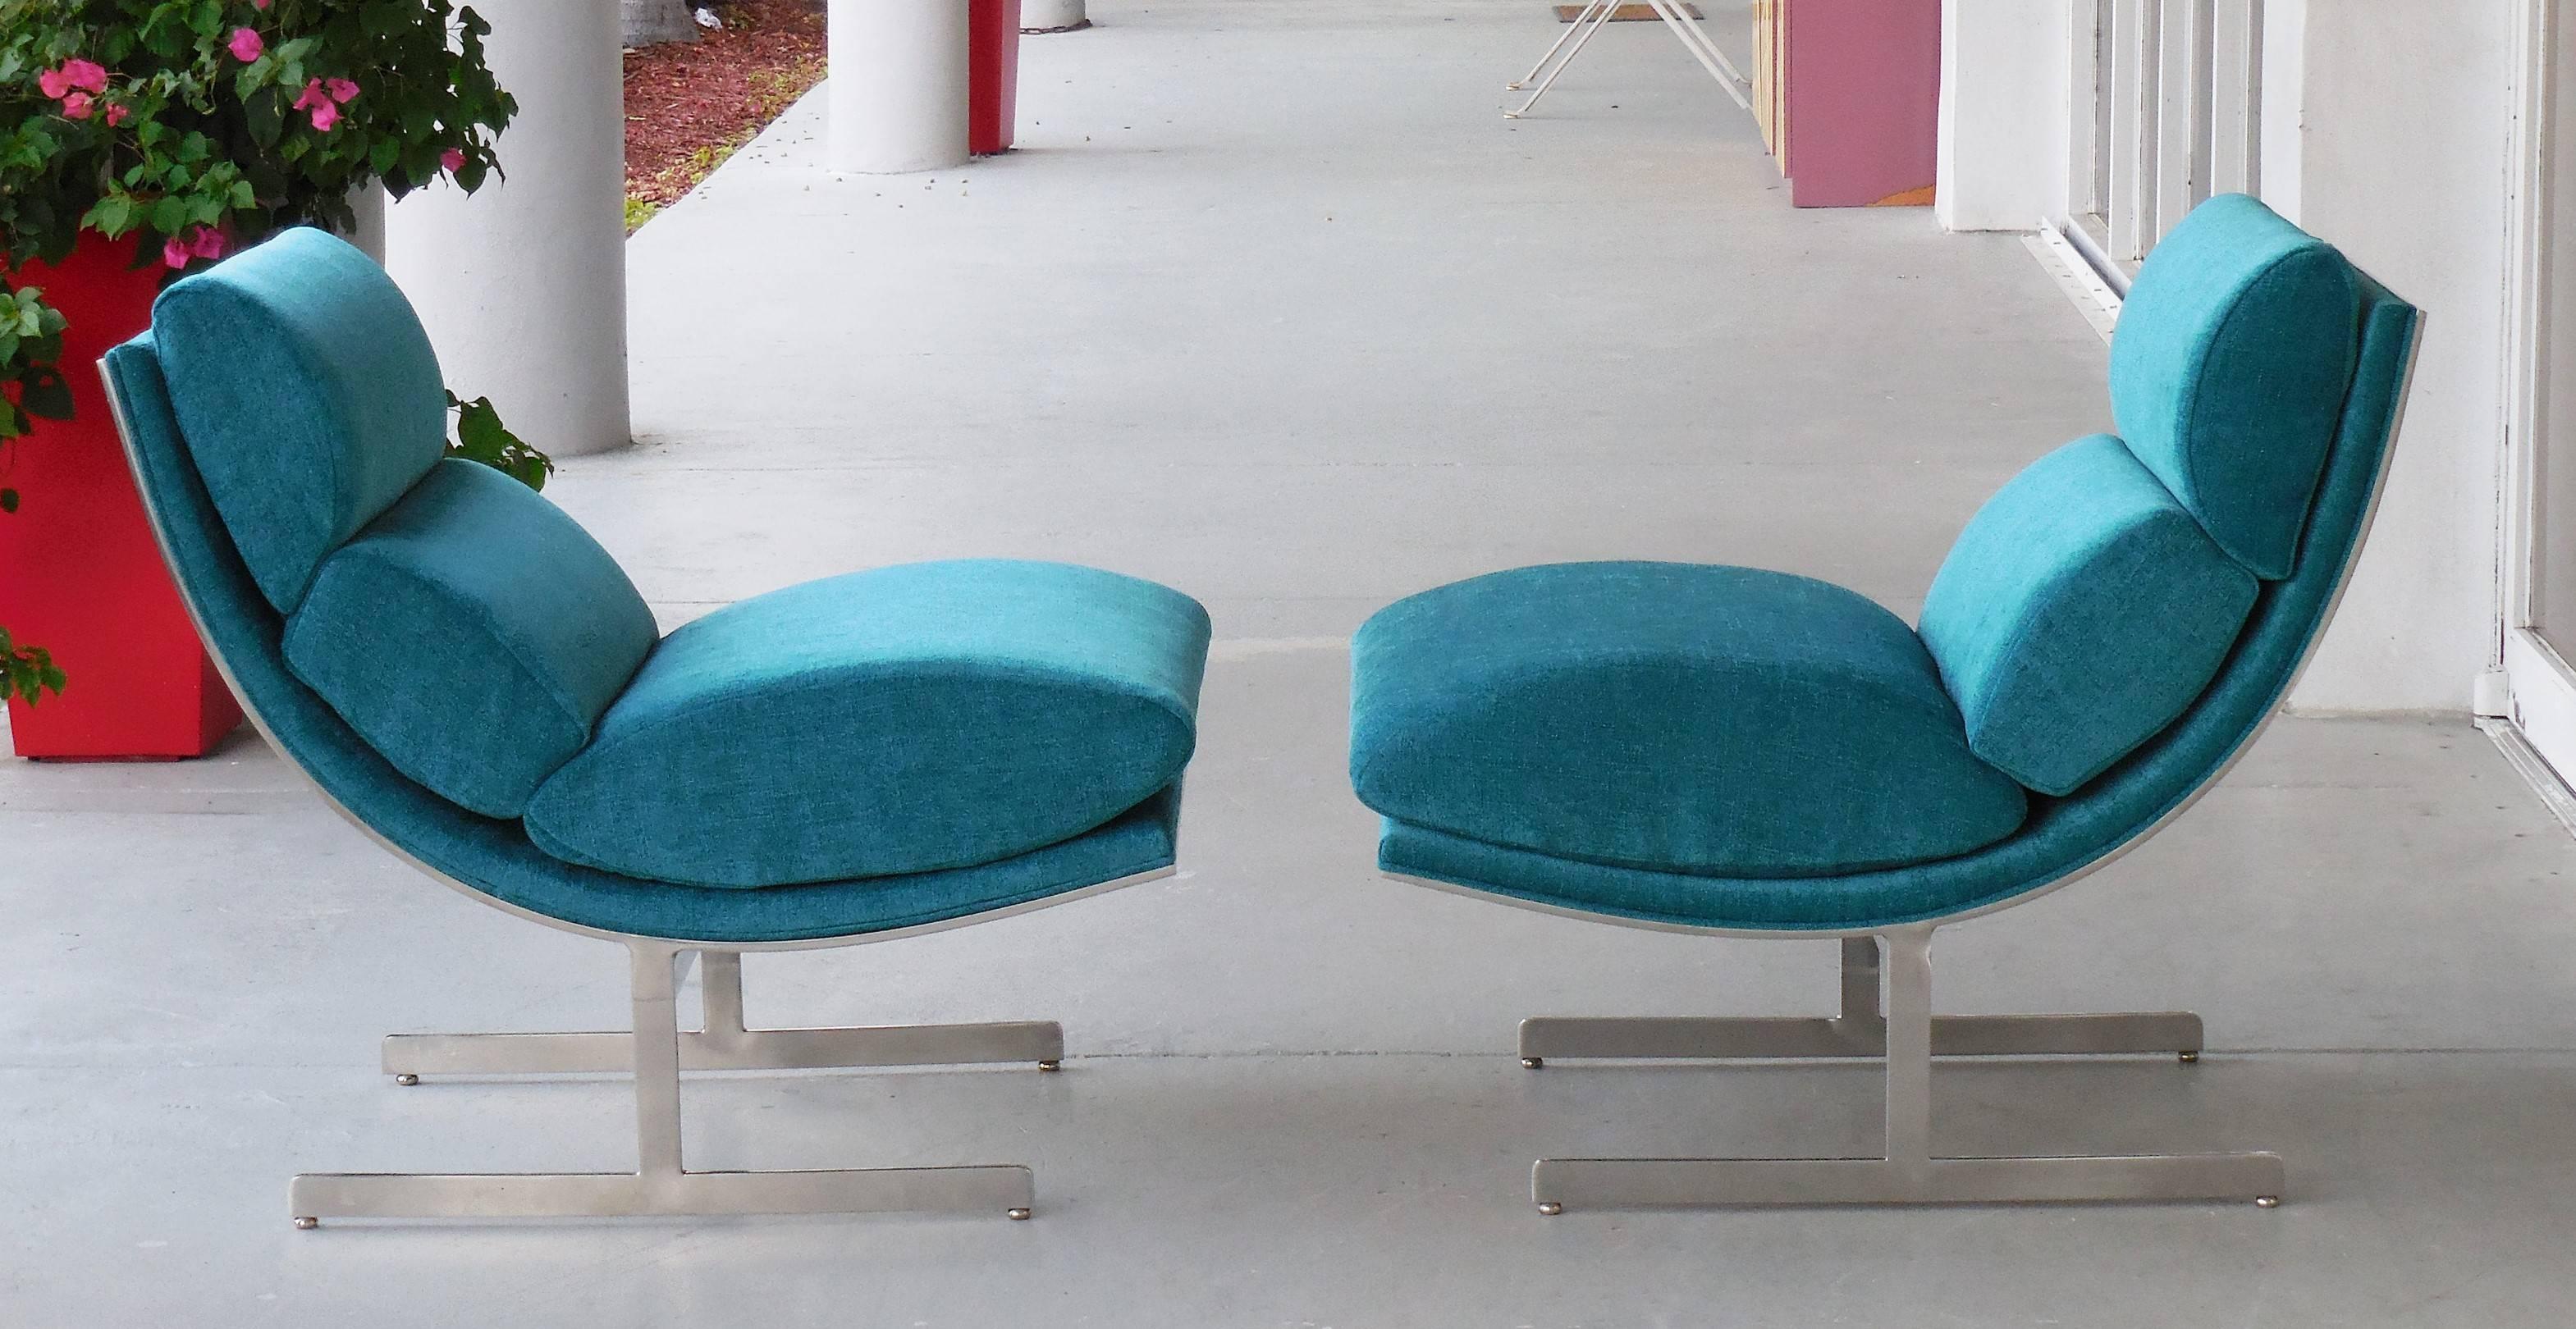 Late 20th Century Pair of Turquoise Stainless Steel Chairs by Kipp Stewart